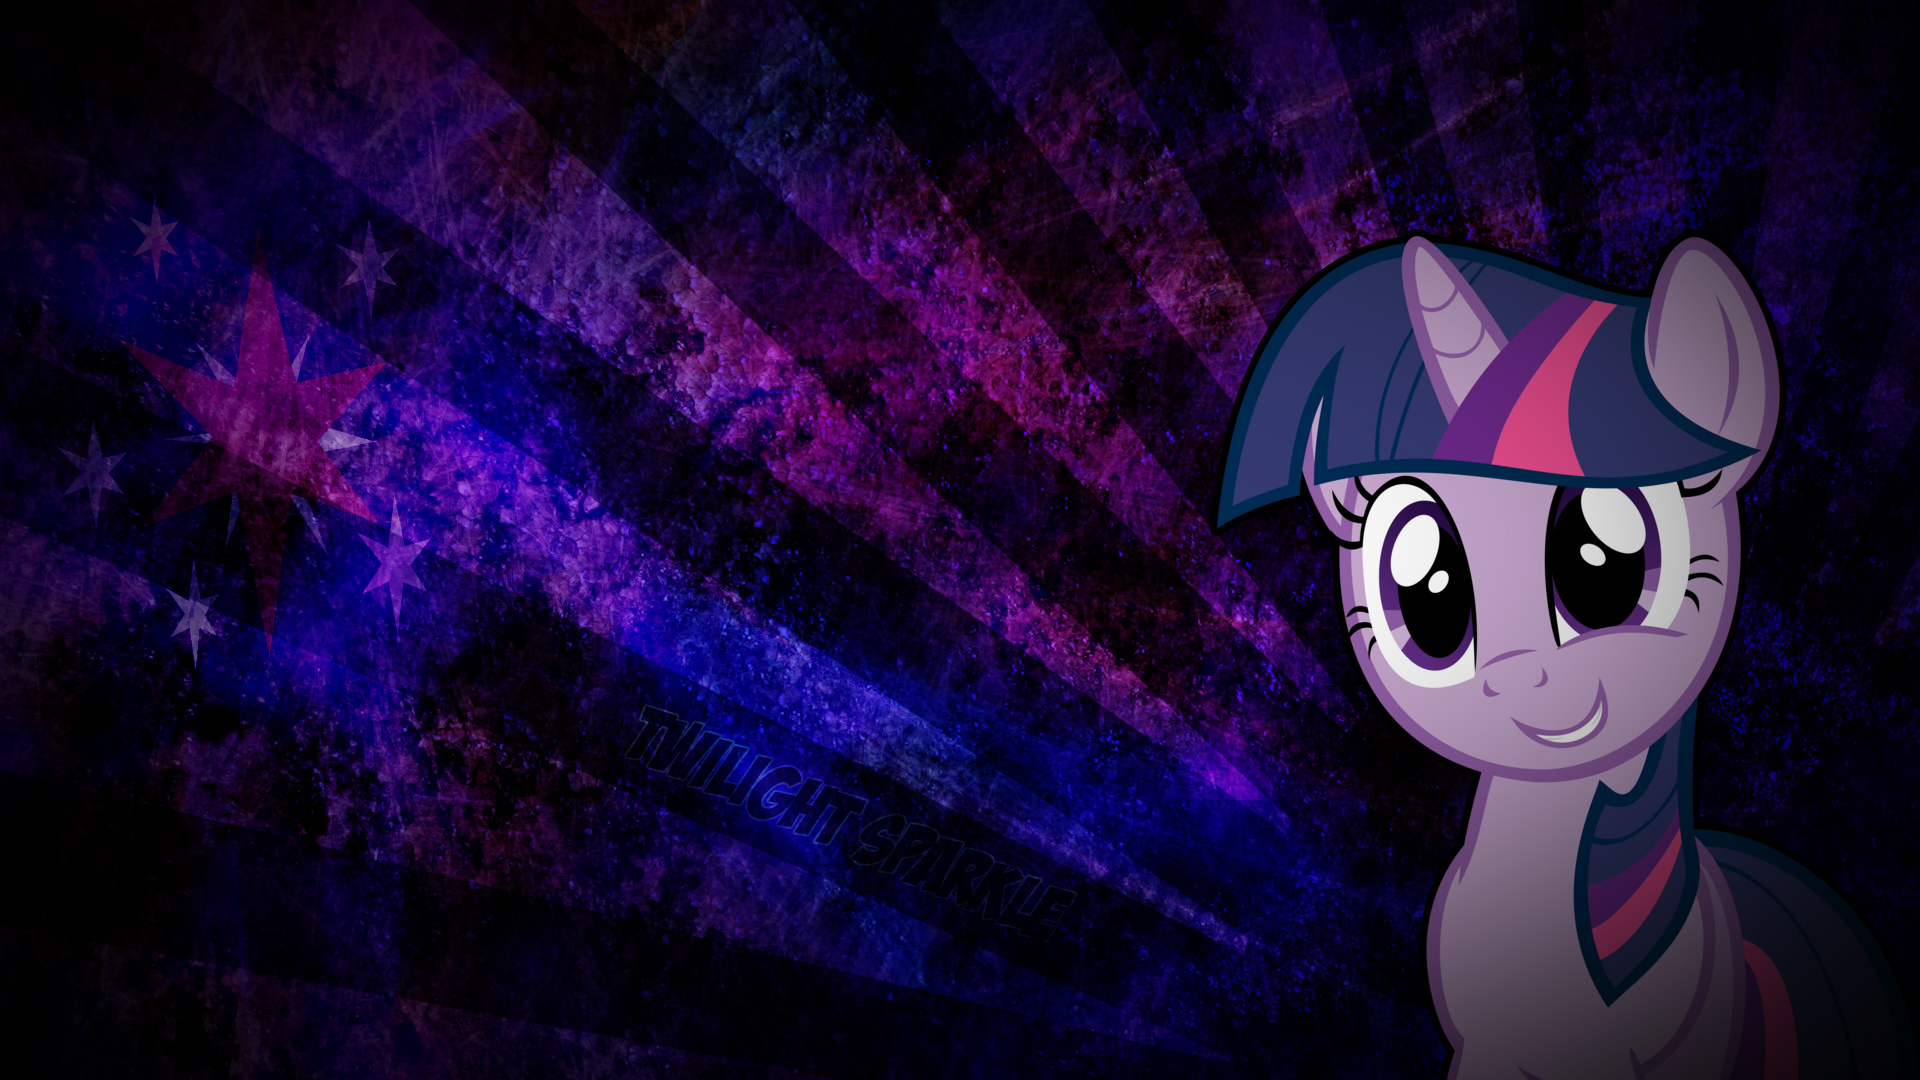 Twilight Sparkle Wallpaper by BlondeauJ and Kigaroth